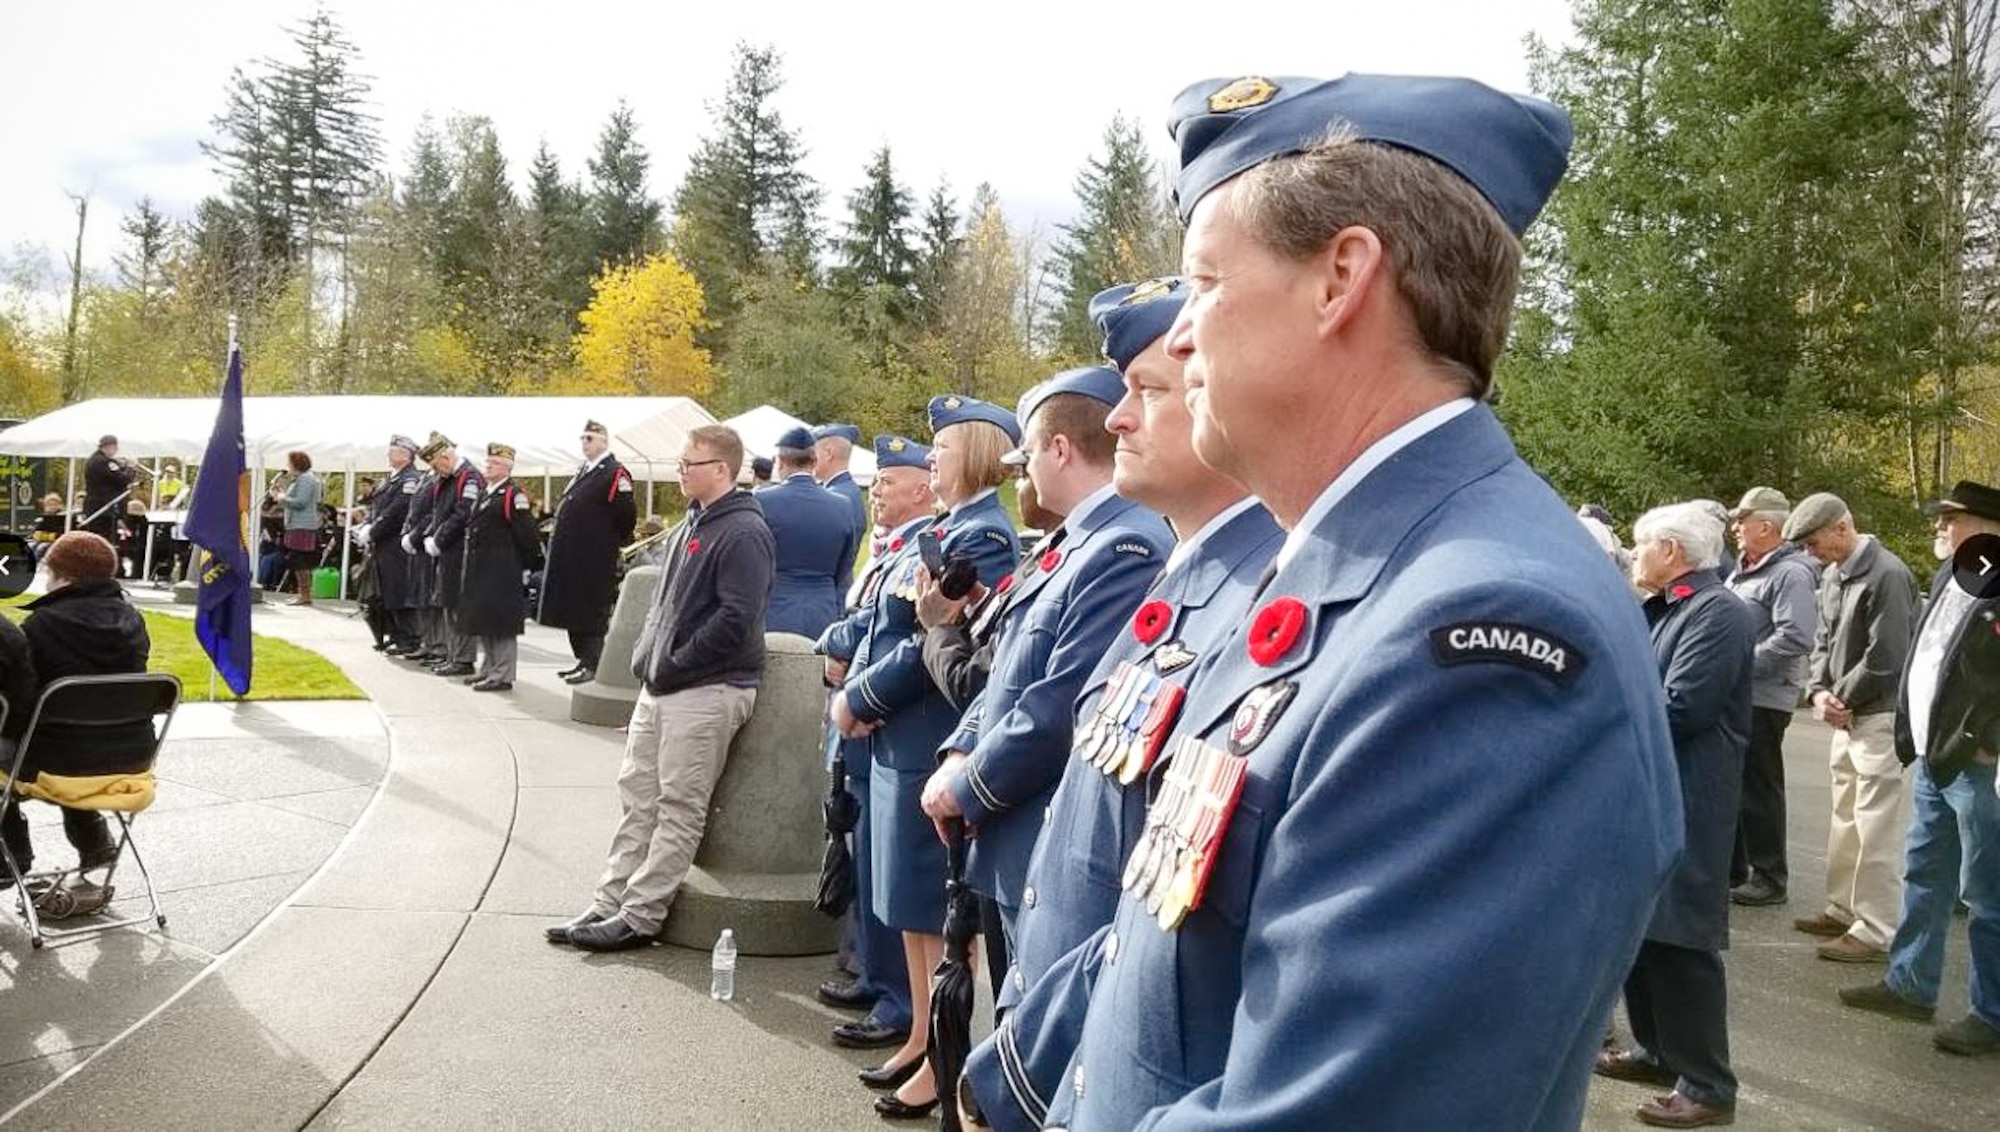 Members of the WADS Canadian Detachment await the beginning of the Veterans Day program at the Tahoma National Cemetery.  Pictured from front to back are: Capt. Todd Rose, Capt. Patrick Morris, Capt. Mark Hynes, Master Seaman Malisa Ogunniya, Capt. Barb Steele and Capt. Jordon Harpe.